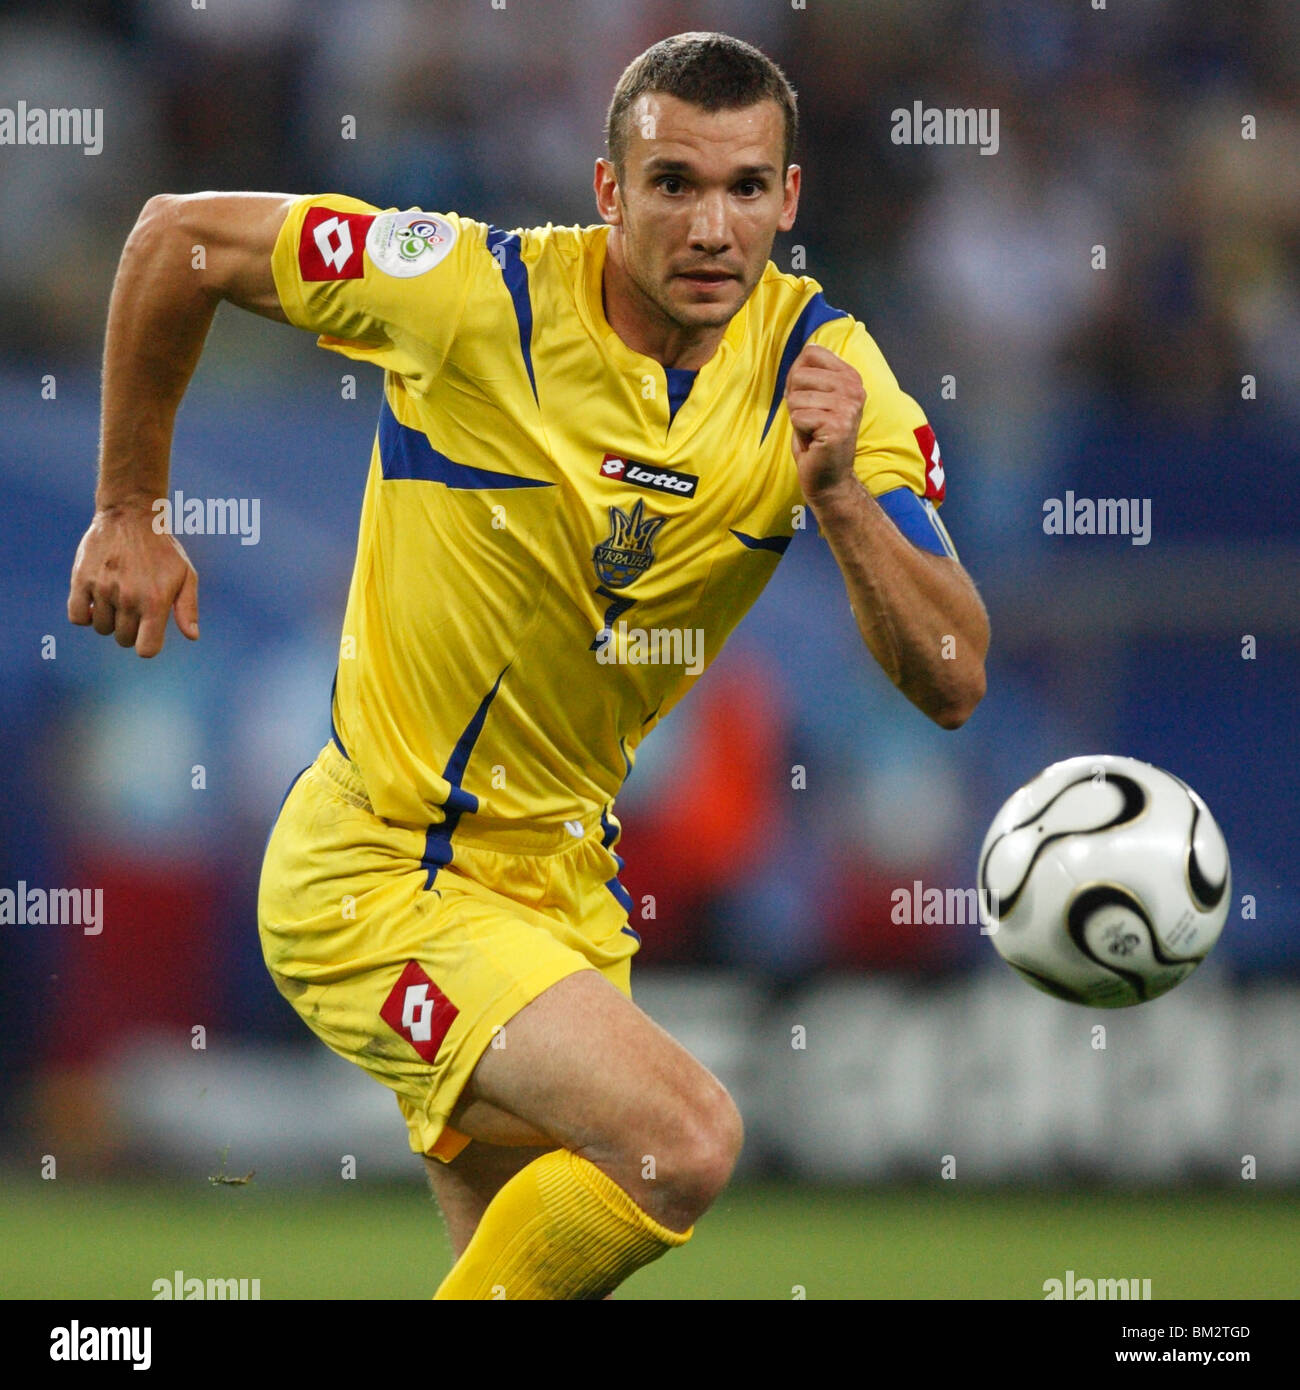 Andriy Shevchenko of Ukraine chases the ball during a FIFA World Cup quarterfinal match against Italy June 30, 2006. Stock Photo